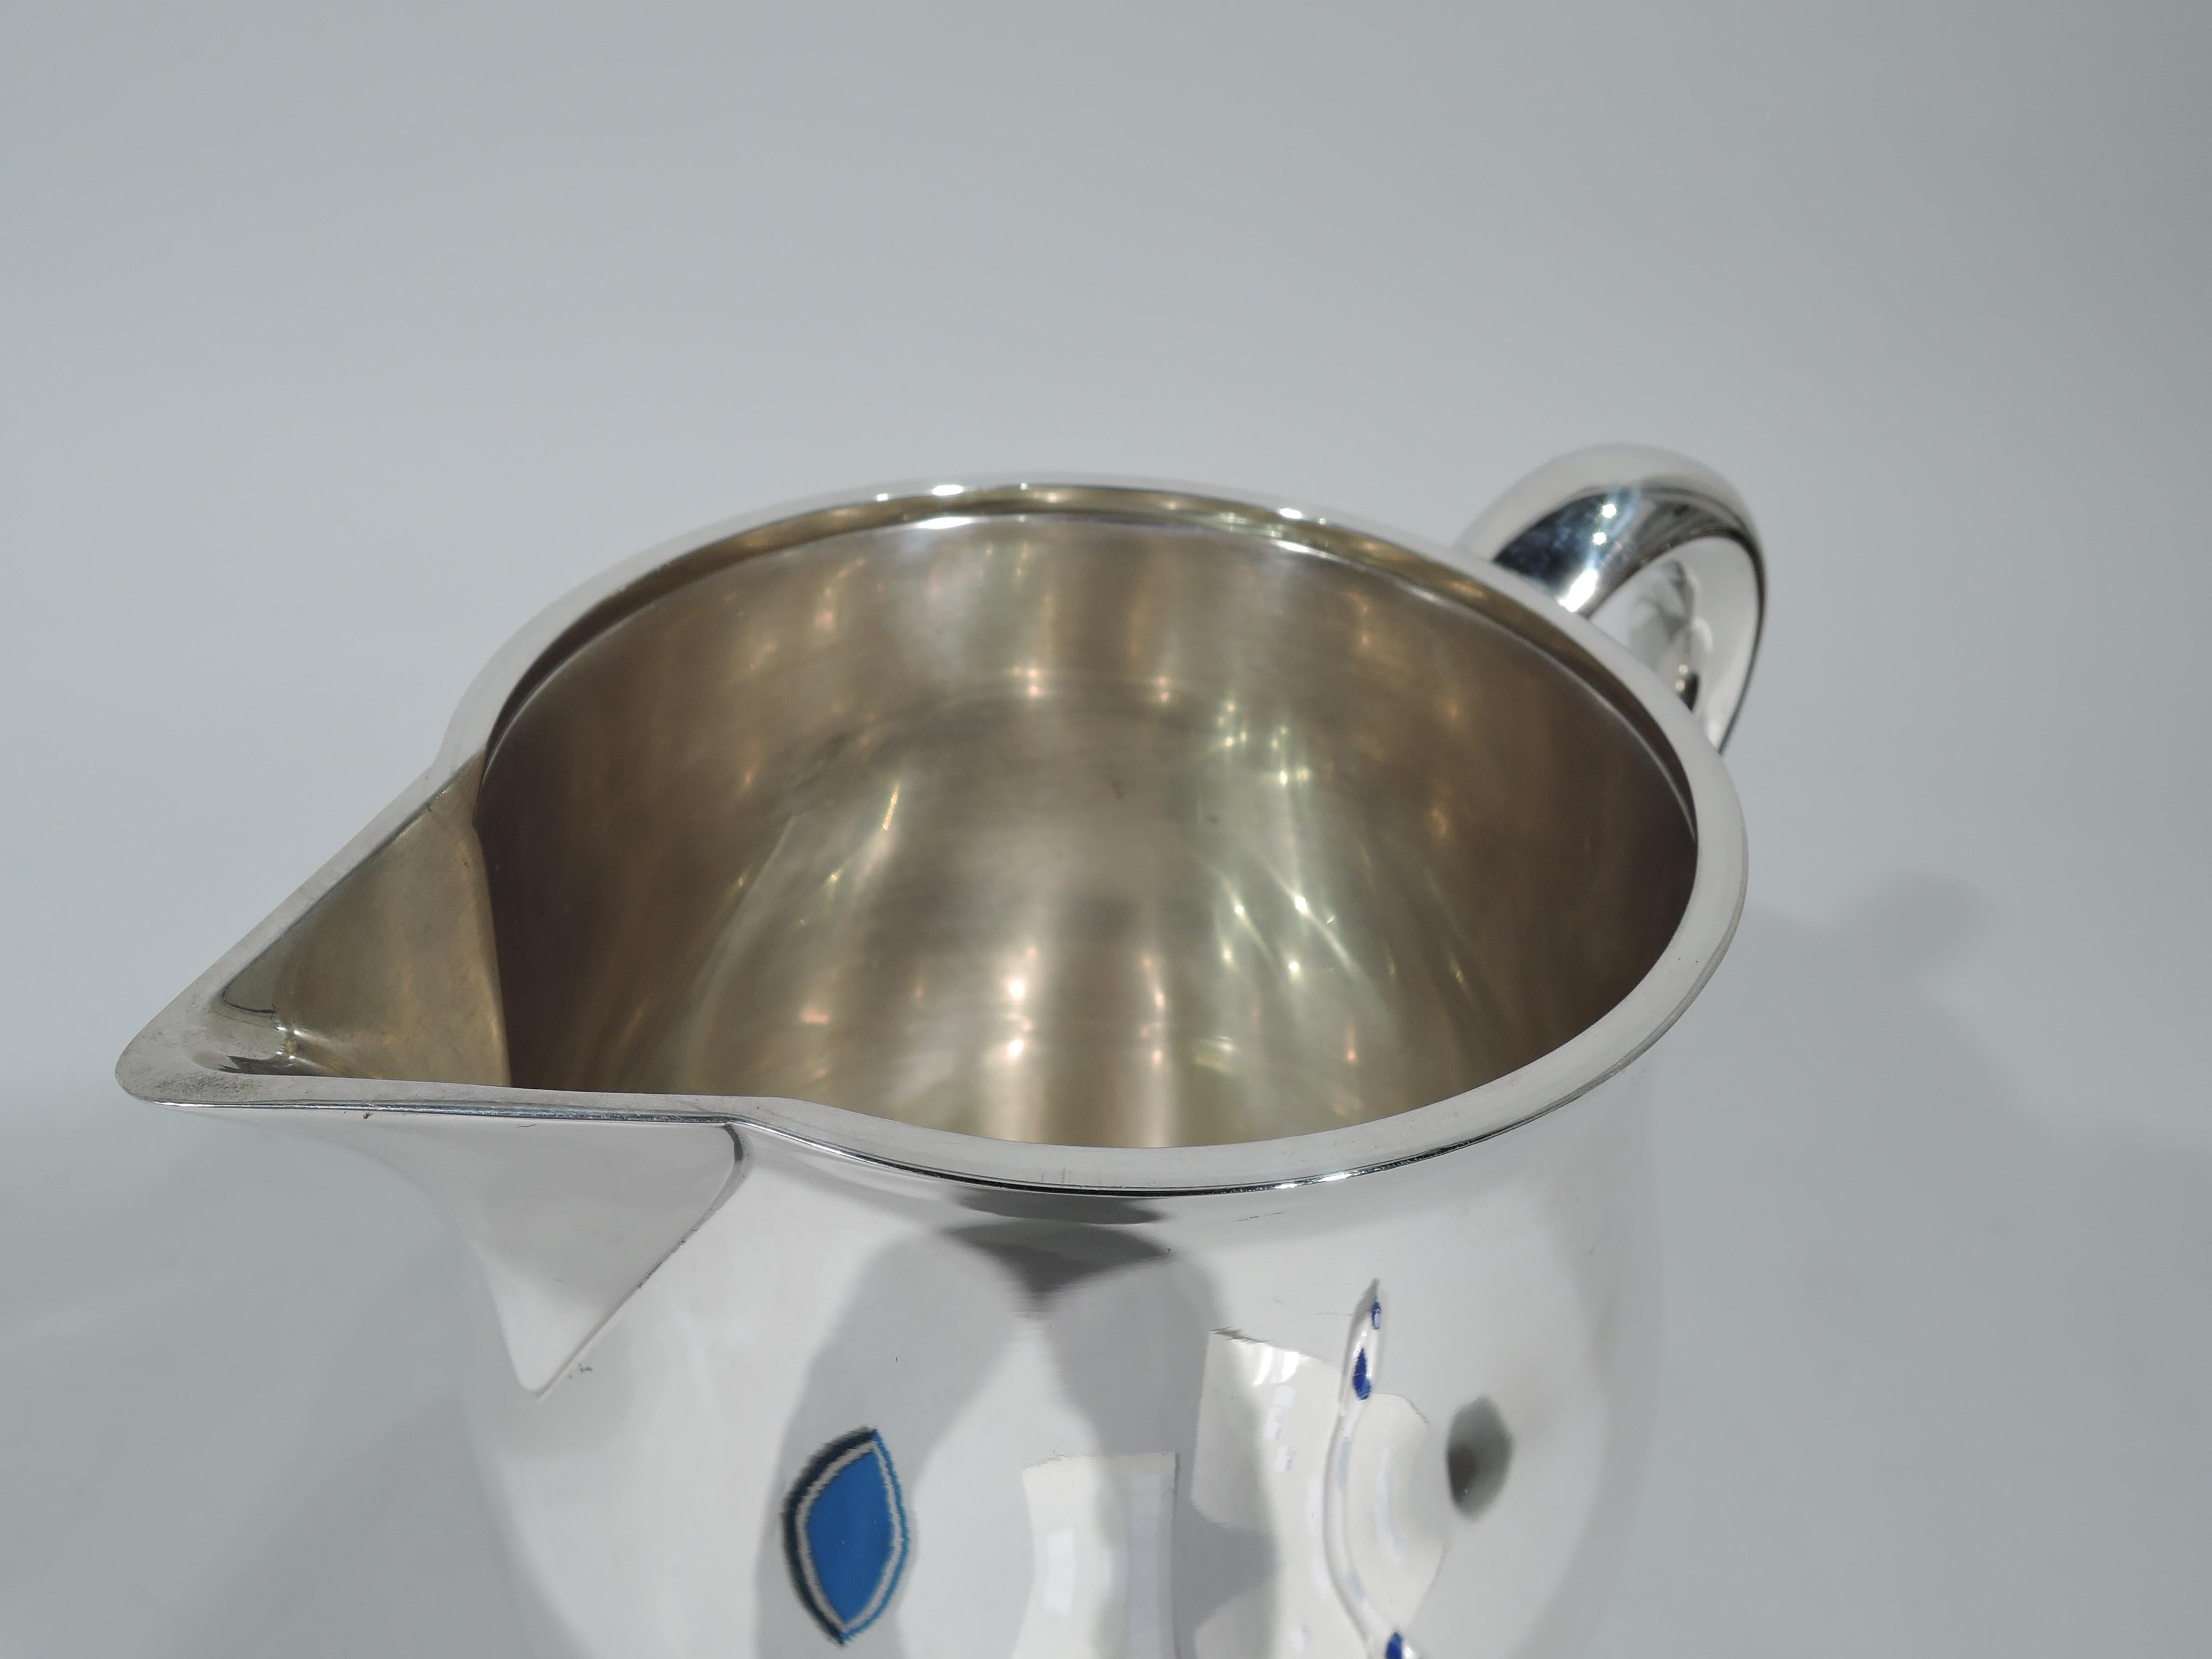 Colonial Revival sterling silver water pitcher. Made by Tuttle in Boston in 1953. Gently curved body, c-scroll handle, and sharp v spout. A beautiful design by Paul Revere that also works on Modern tables. Fully marked including maker’s stamp,